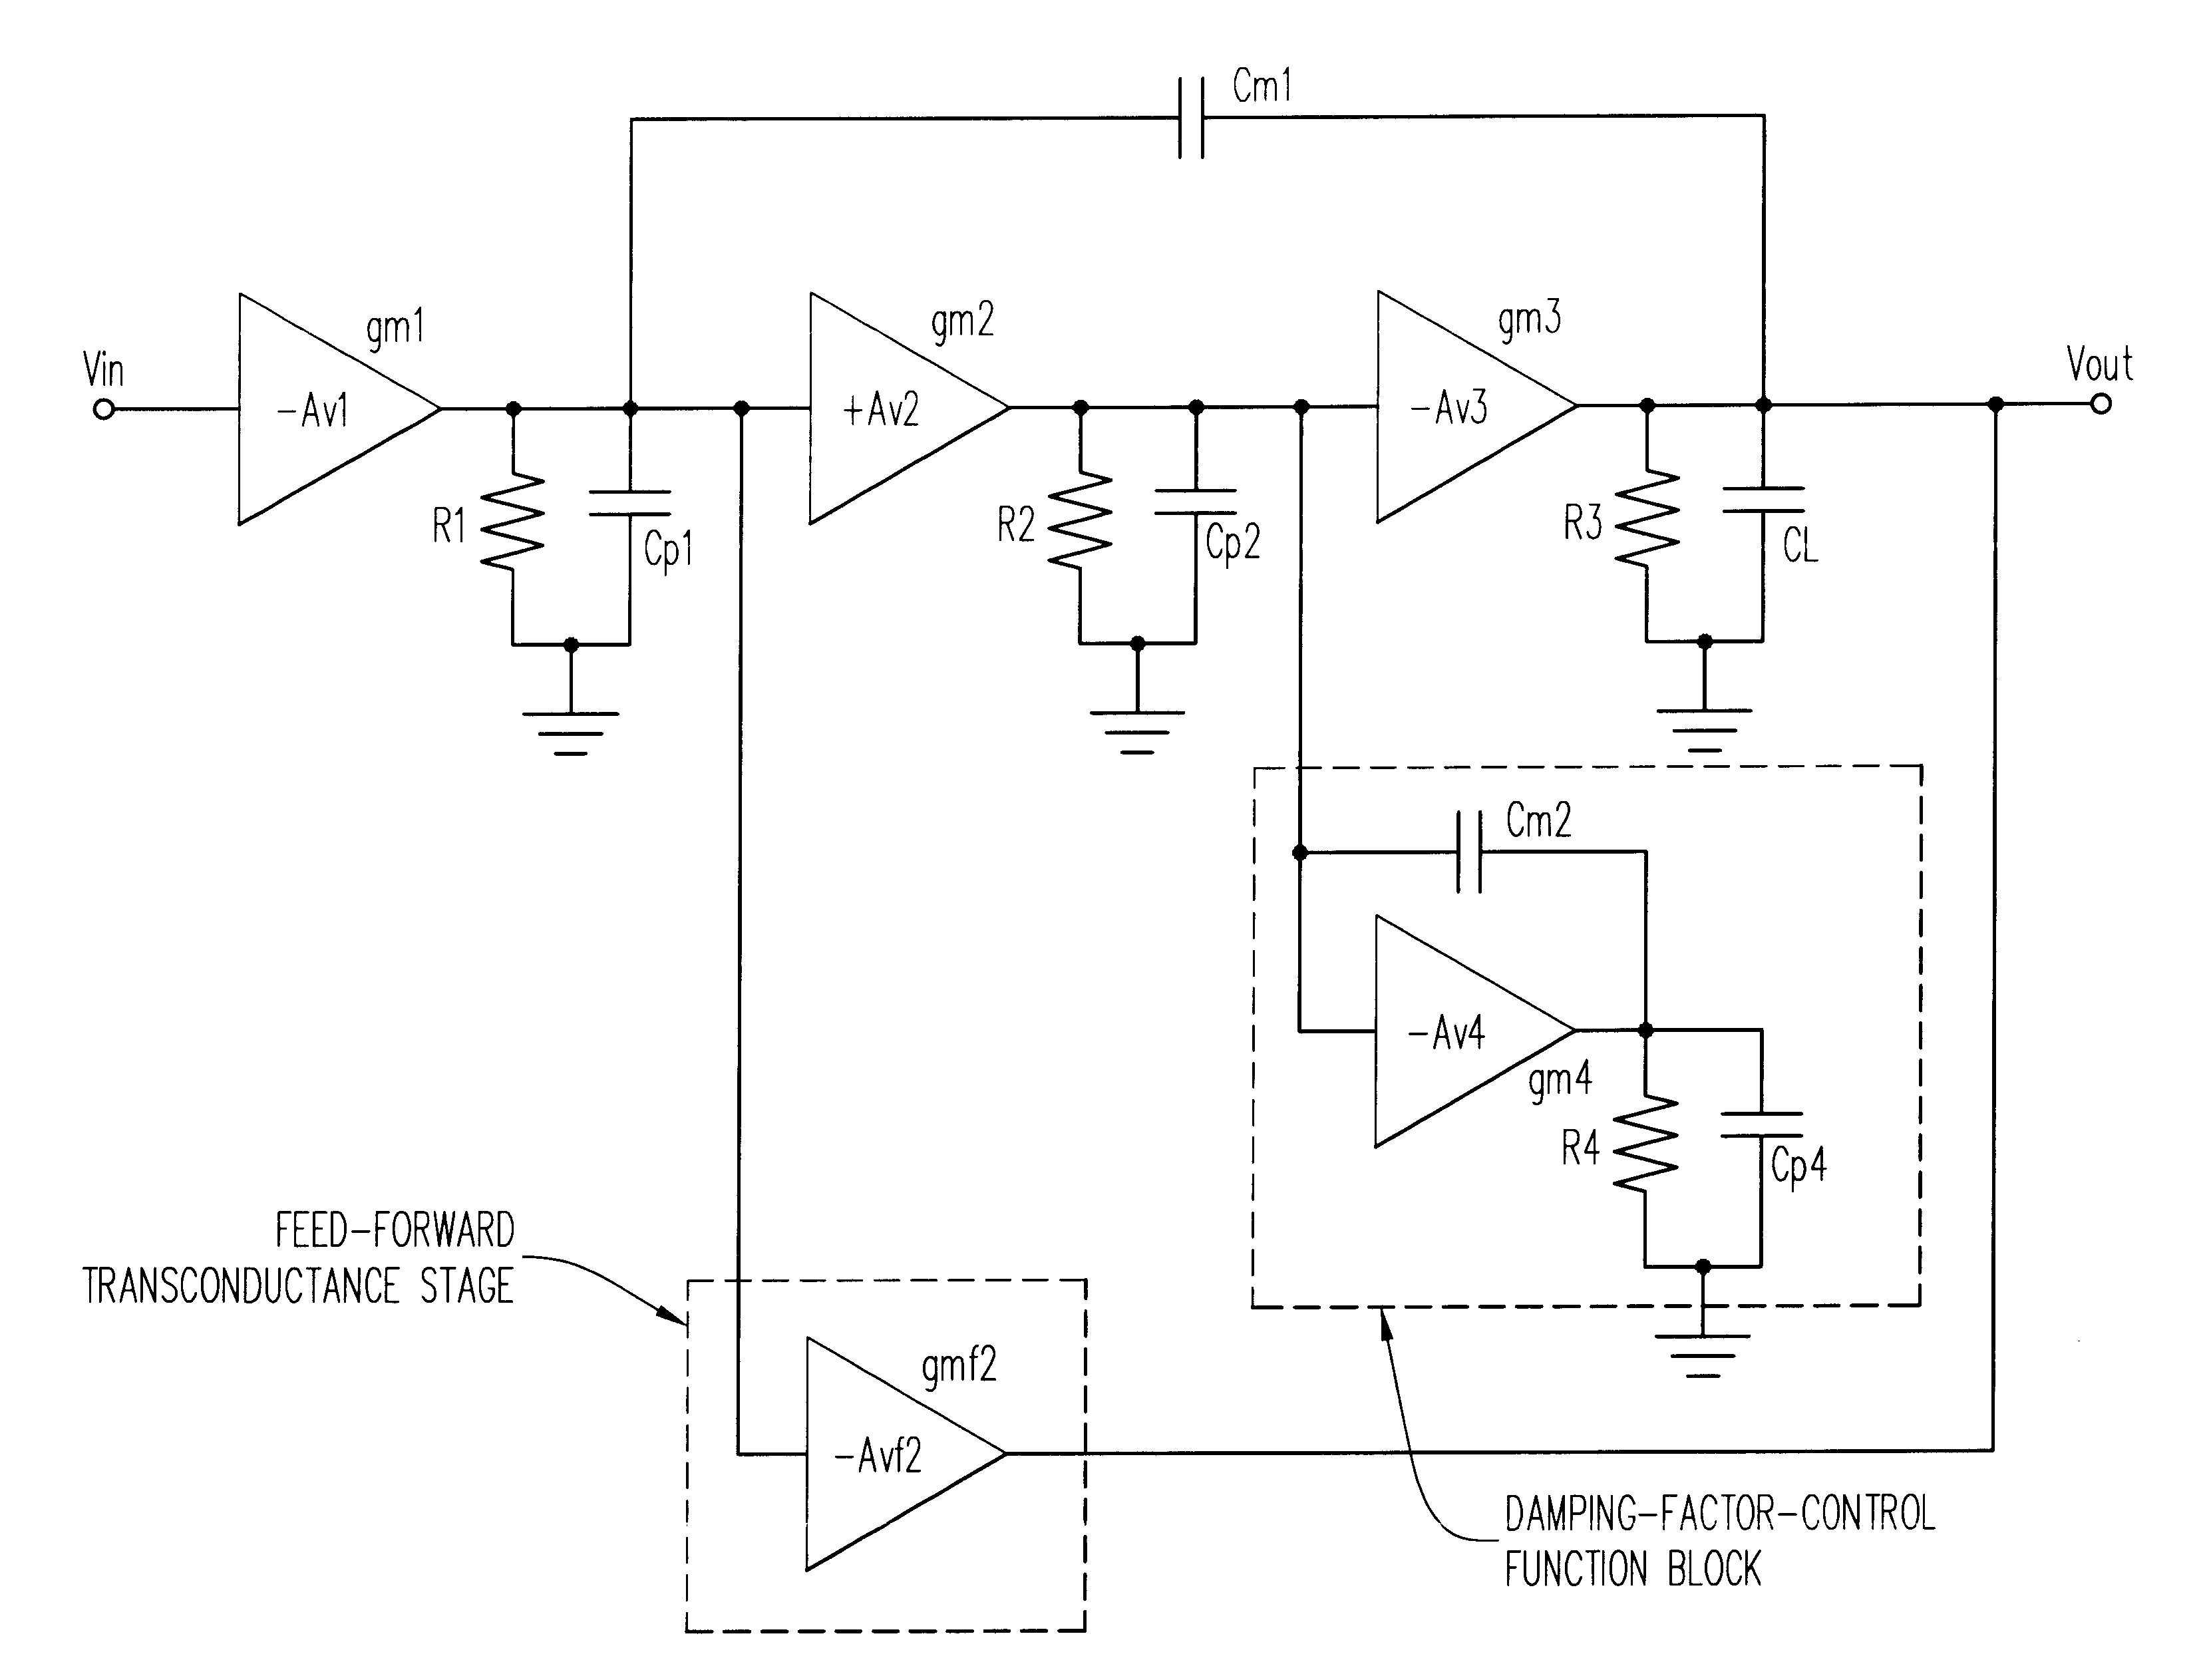 Frequency compensation techniques for low-power multistage amplifiers